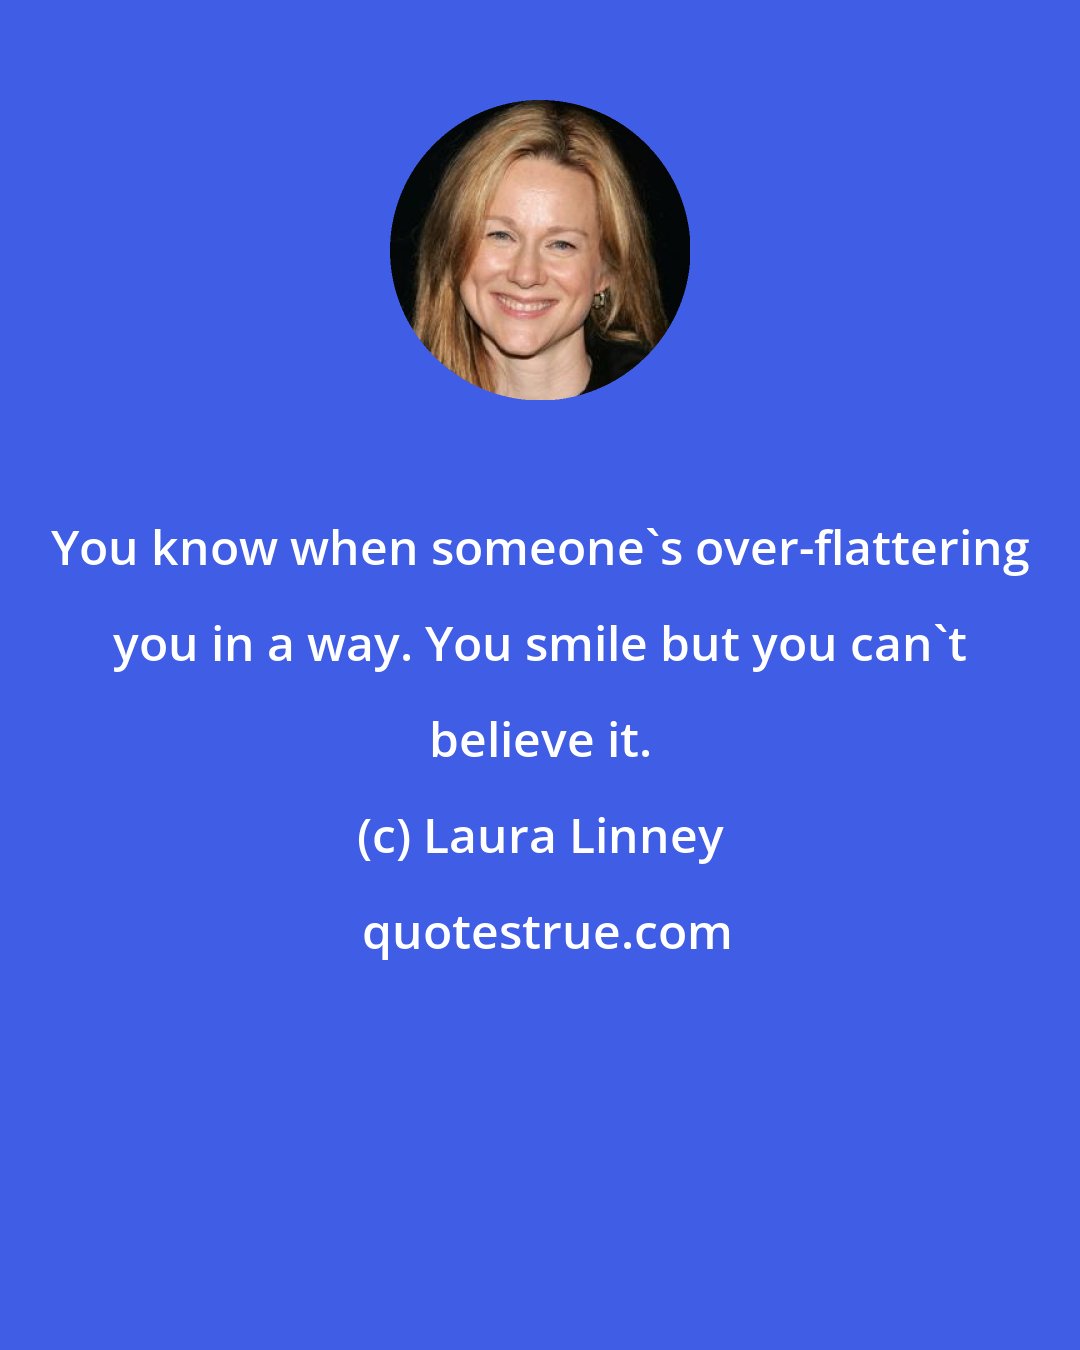 Laura Linney: You know when someone's over-flattering you in a way. You smile but you can't believe it.